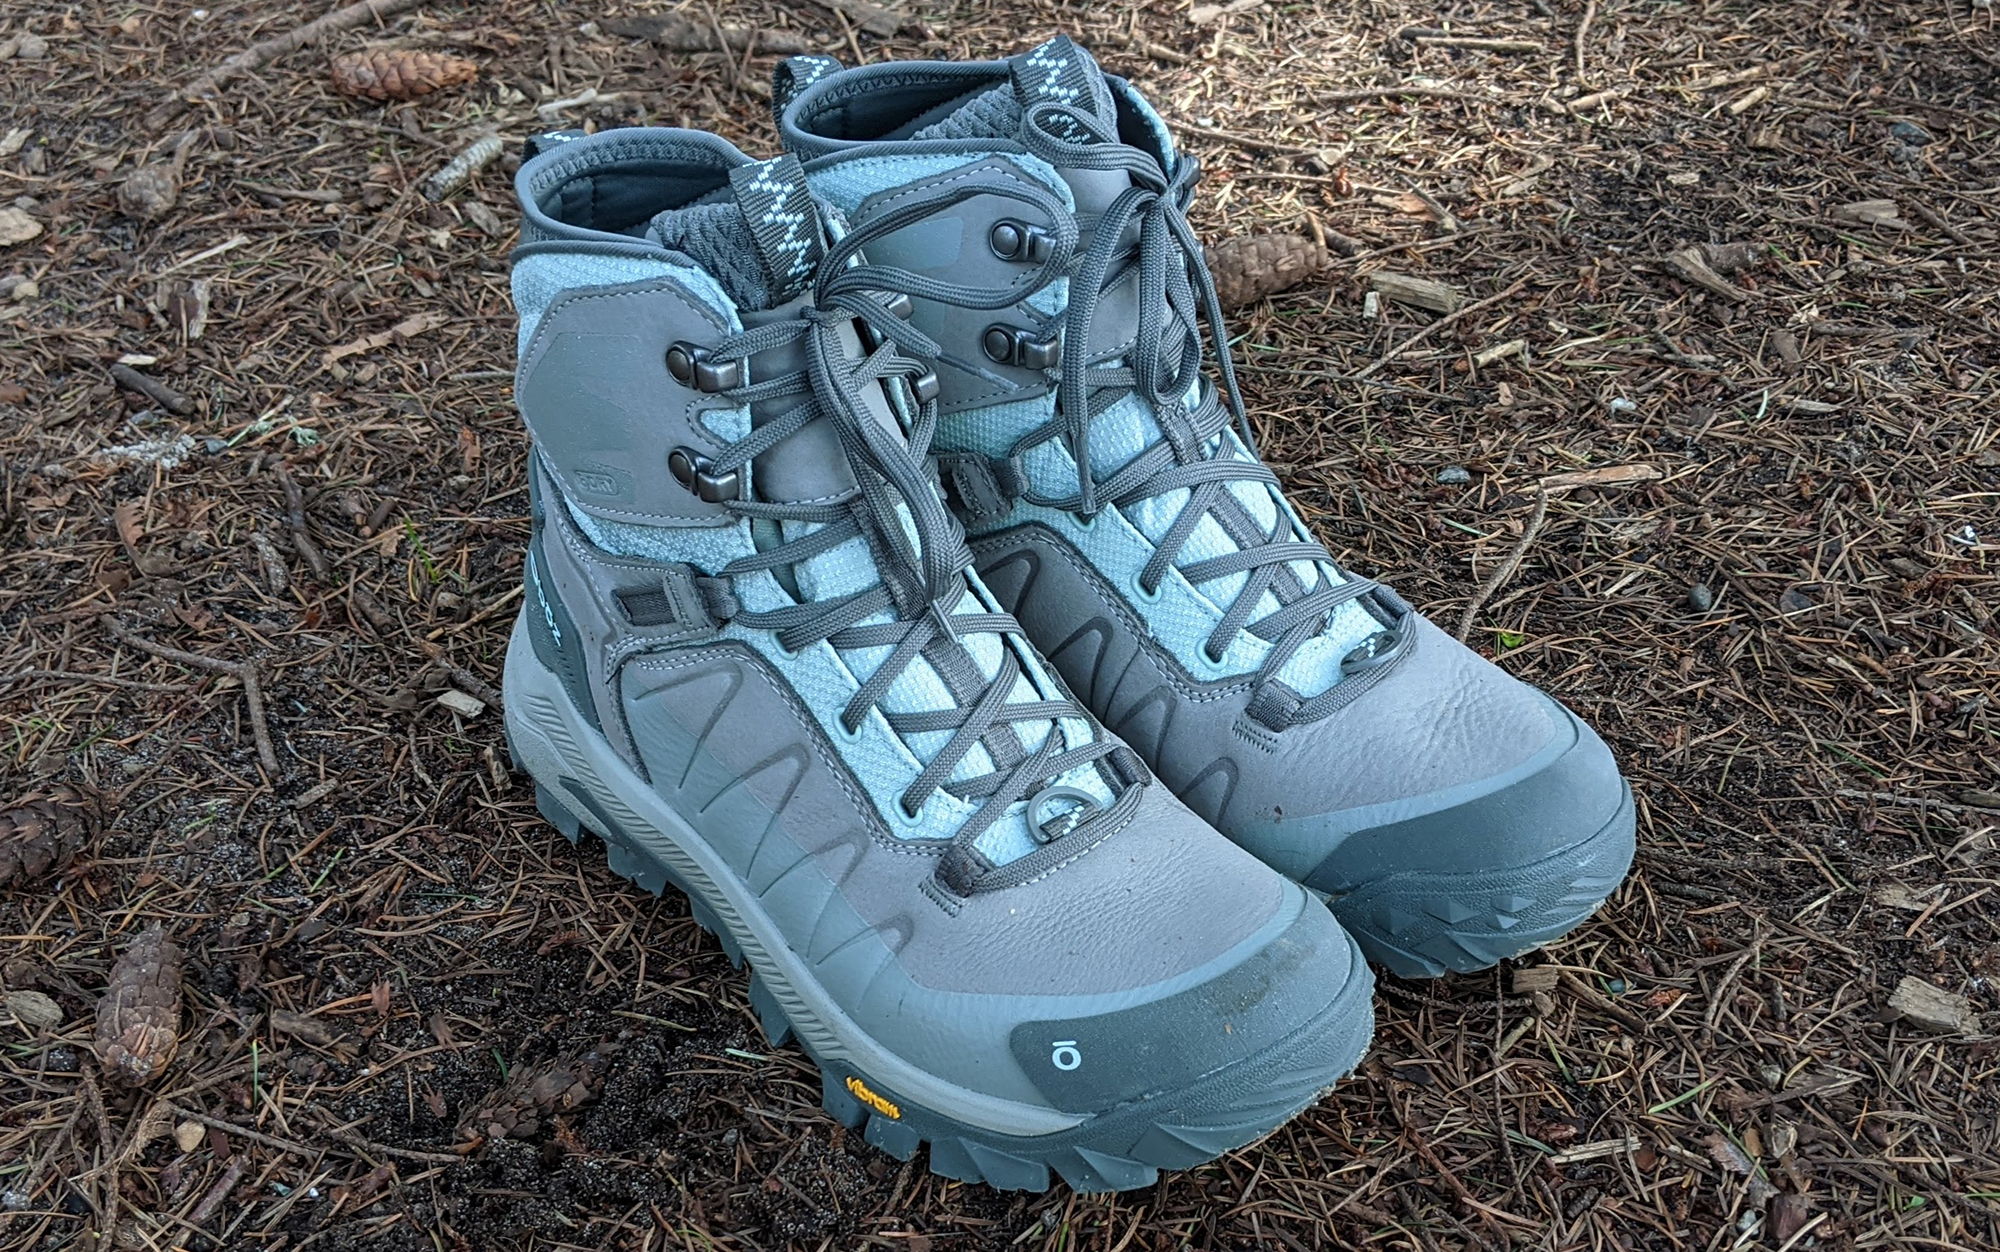 The Oboz Bangtail is one of the best waterproof hiking boots.